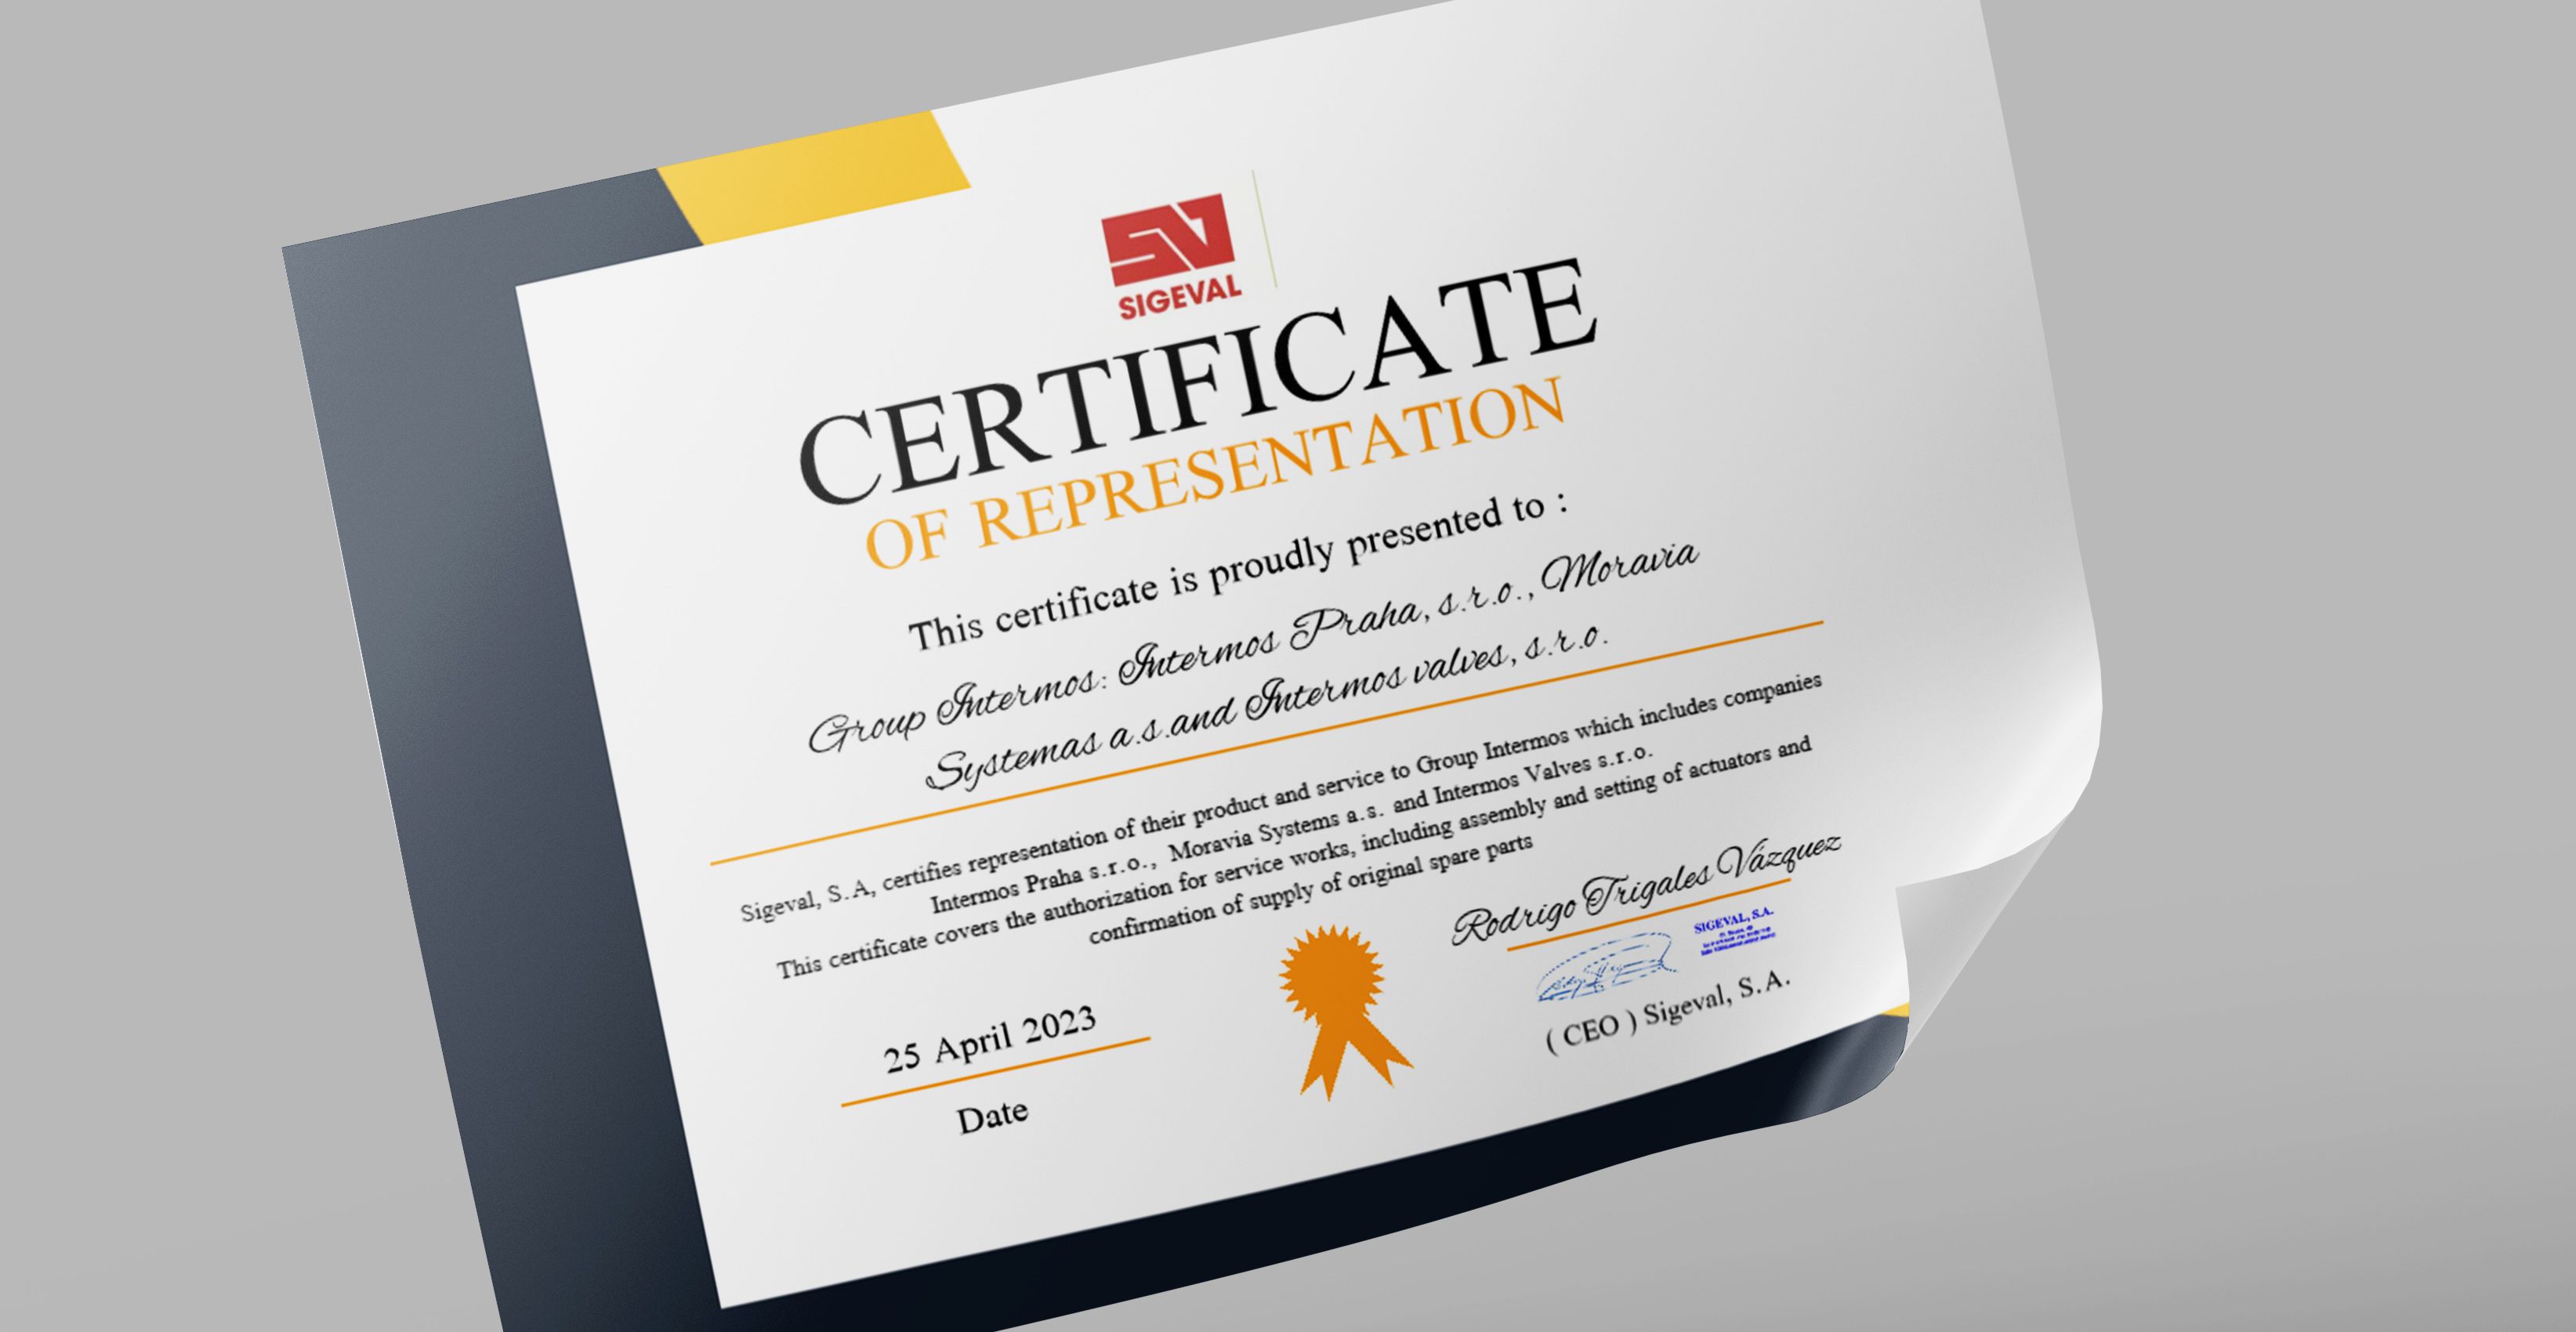 Certificate of our commercial and technical competence from Sigeval company